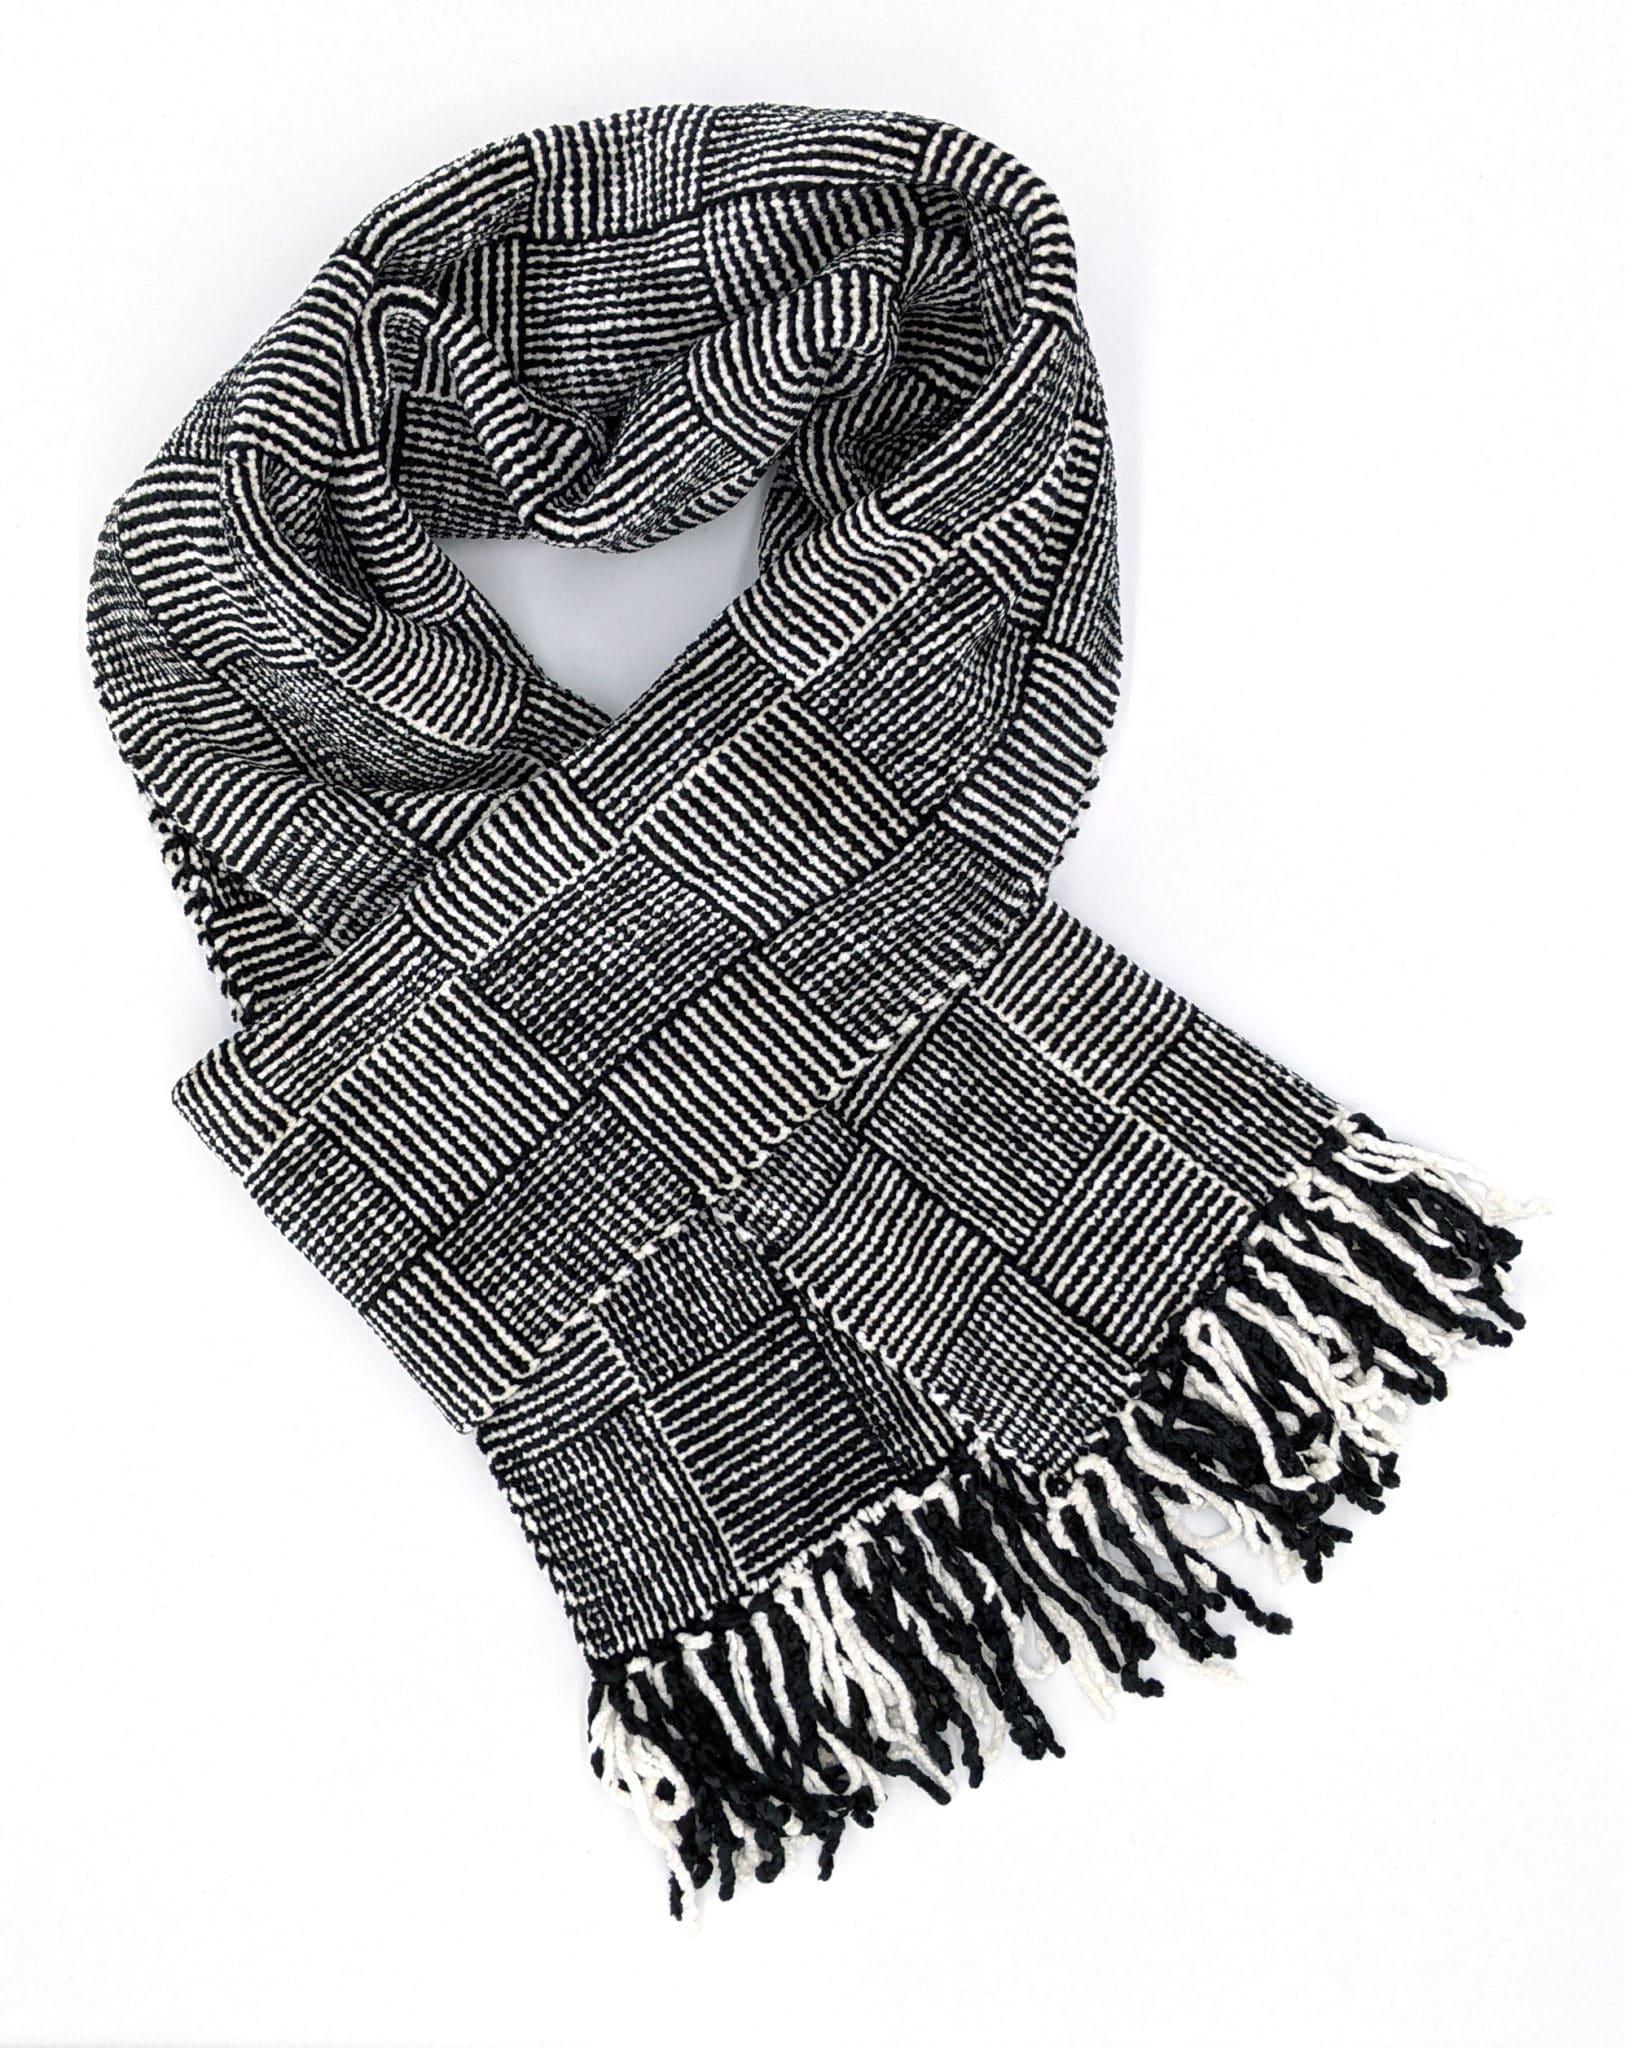 Black and White Log Cabin Weave - Bamboo Chenille Handwoven Scarf 8 x 68